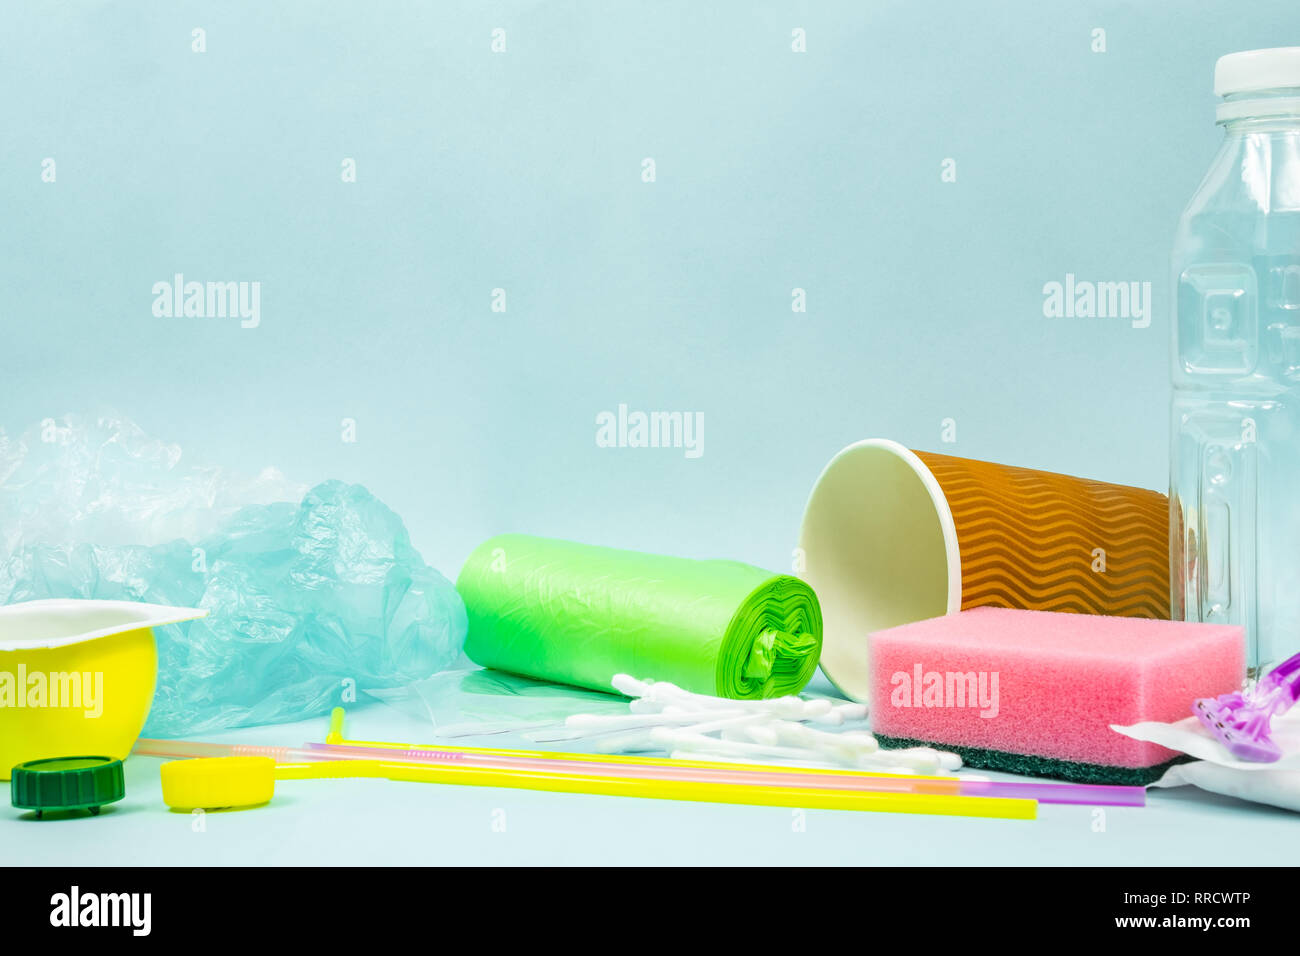 Plastic waste concept: varitety of single use objects that get thrown out every day. Plastic bottle, hygiene items and plastic package depicting ecolo Stock Photo